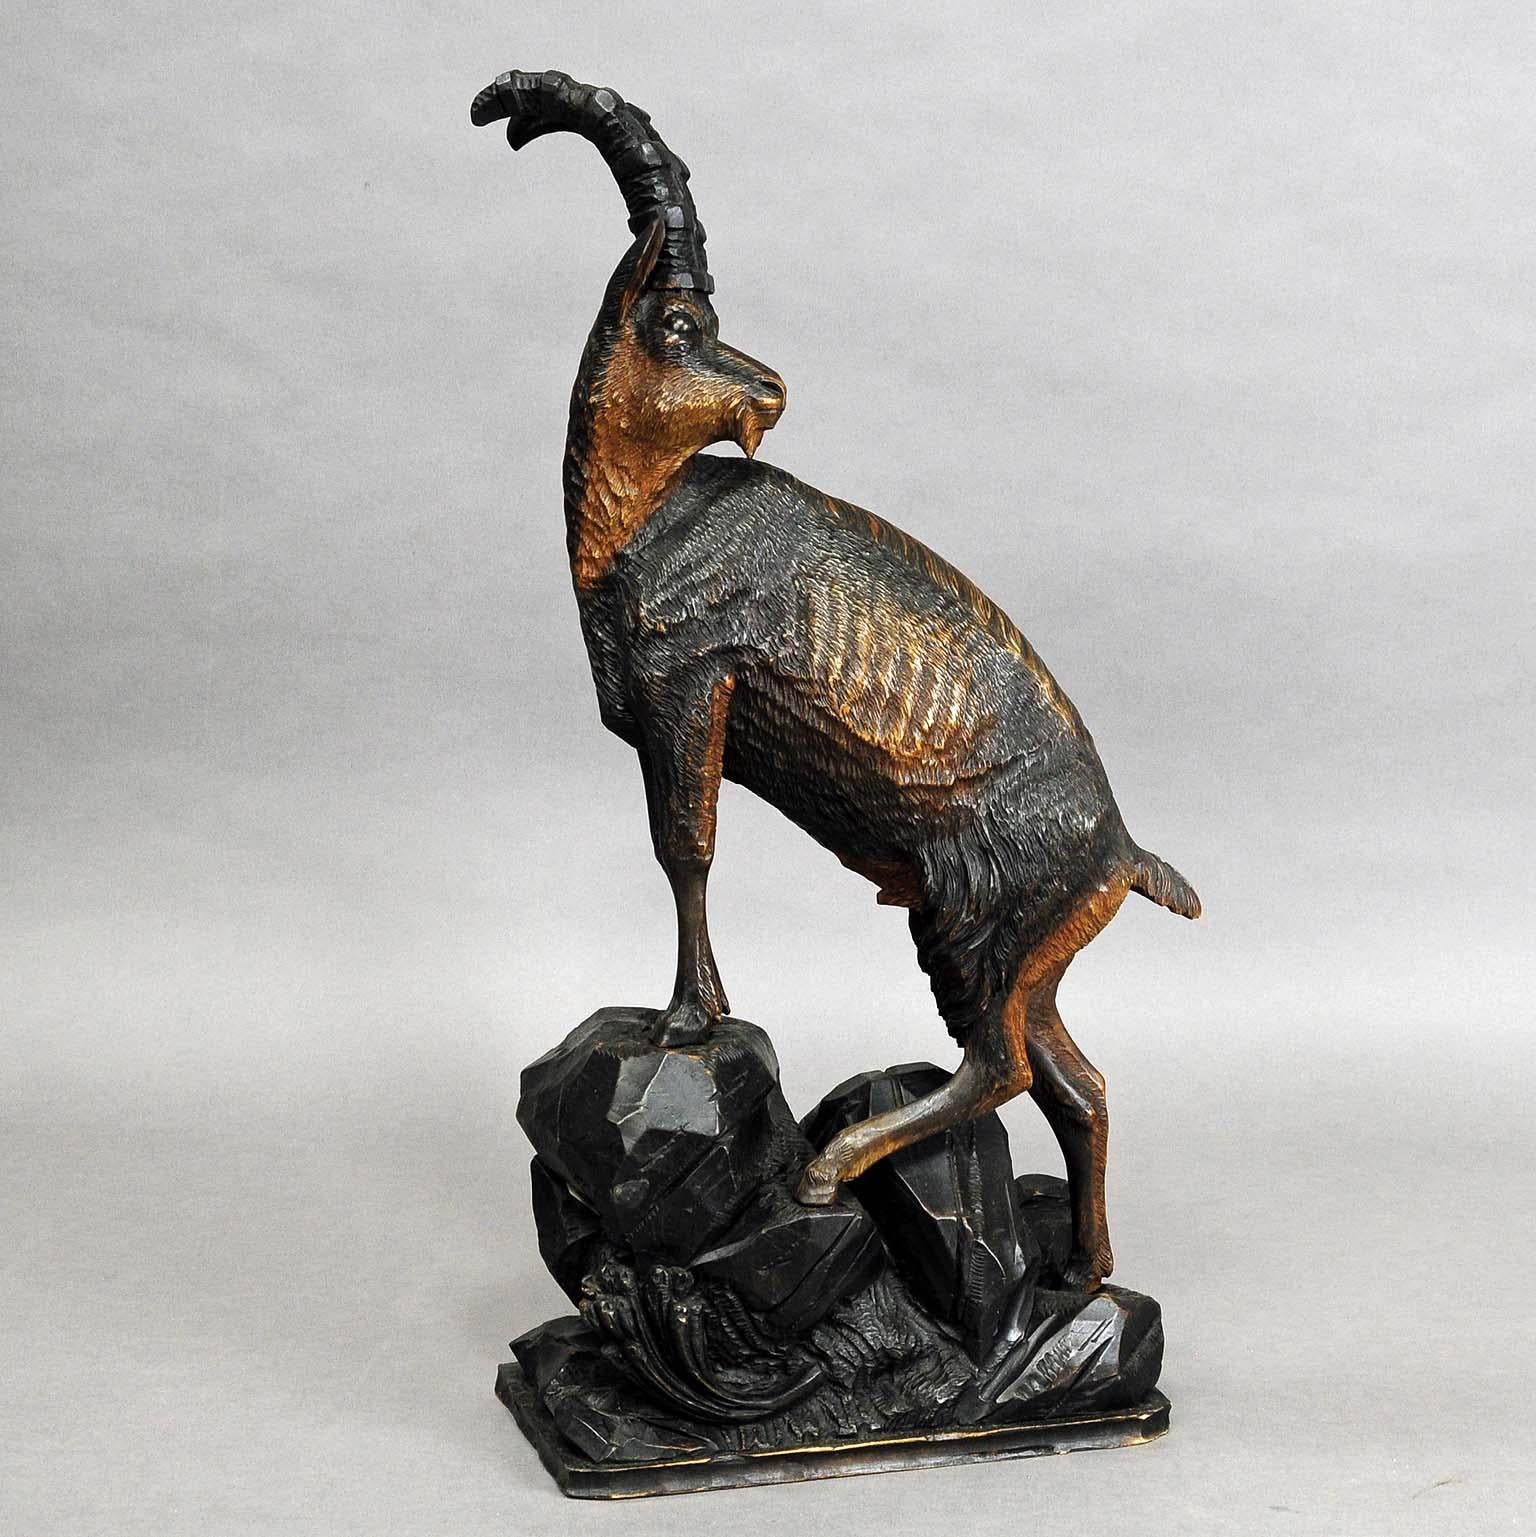 An antique imposing cabin decor wood carving sculpture of an ibex. Black forest or Austria, circa 1900.

Measures: Width 11.81